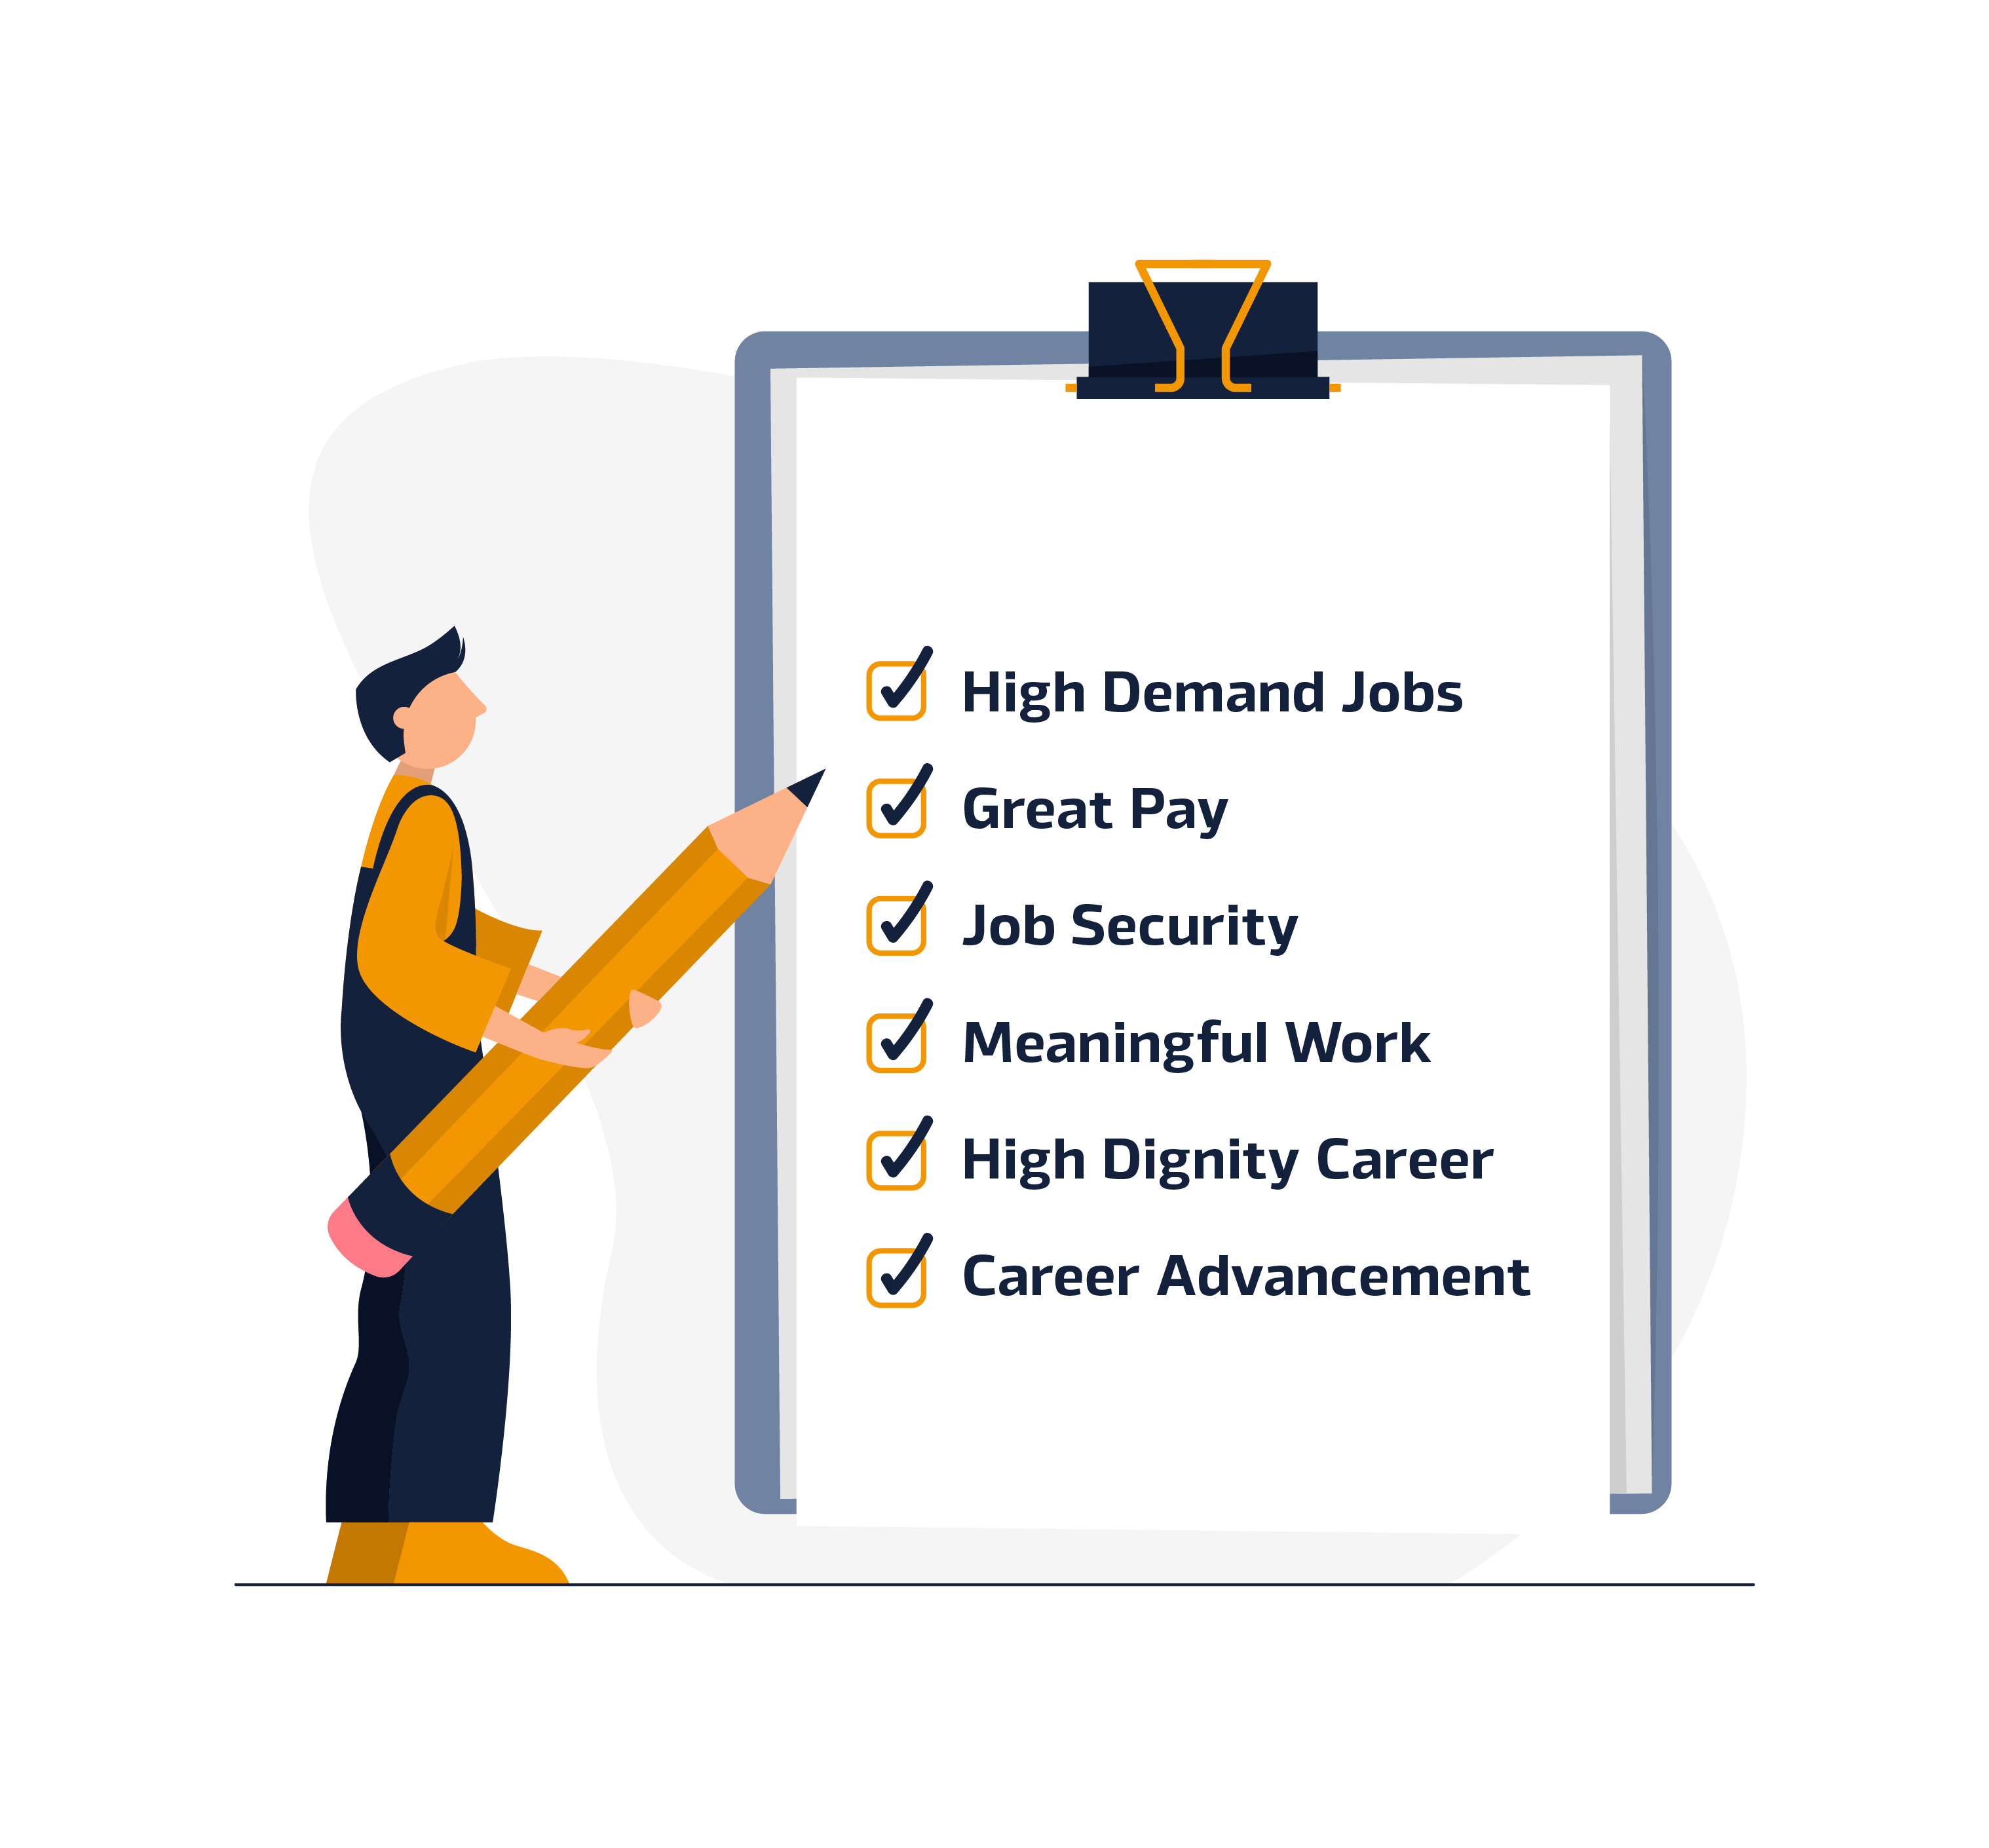 Jobs That Will Be In High Demand In The Future